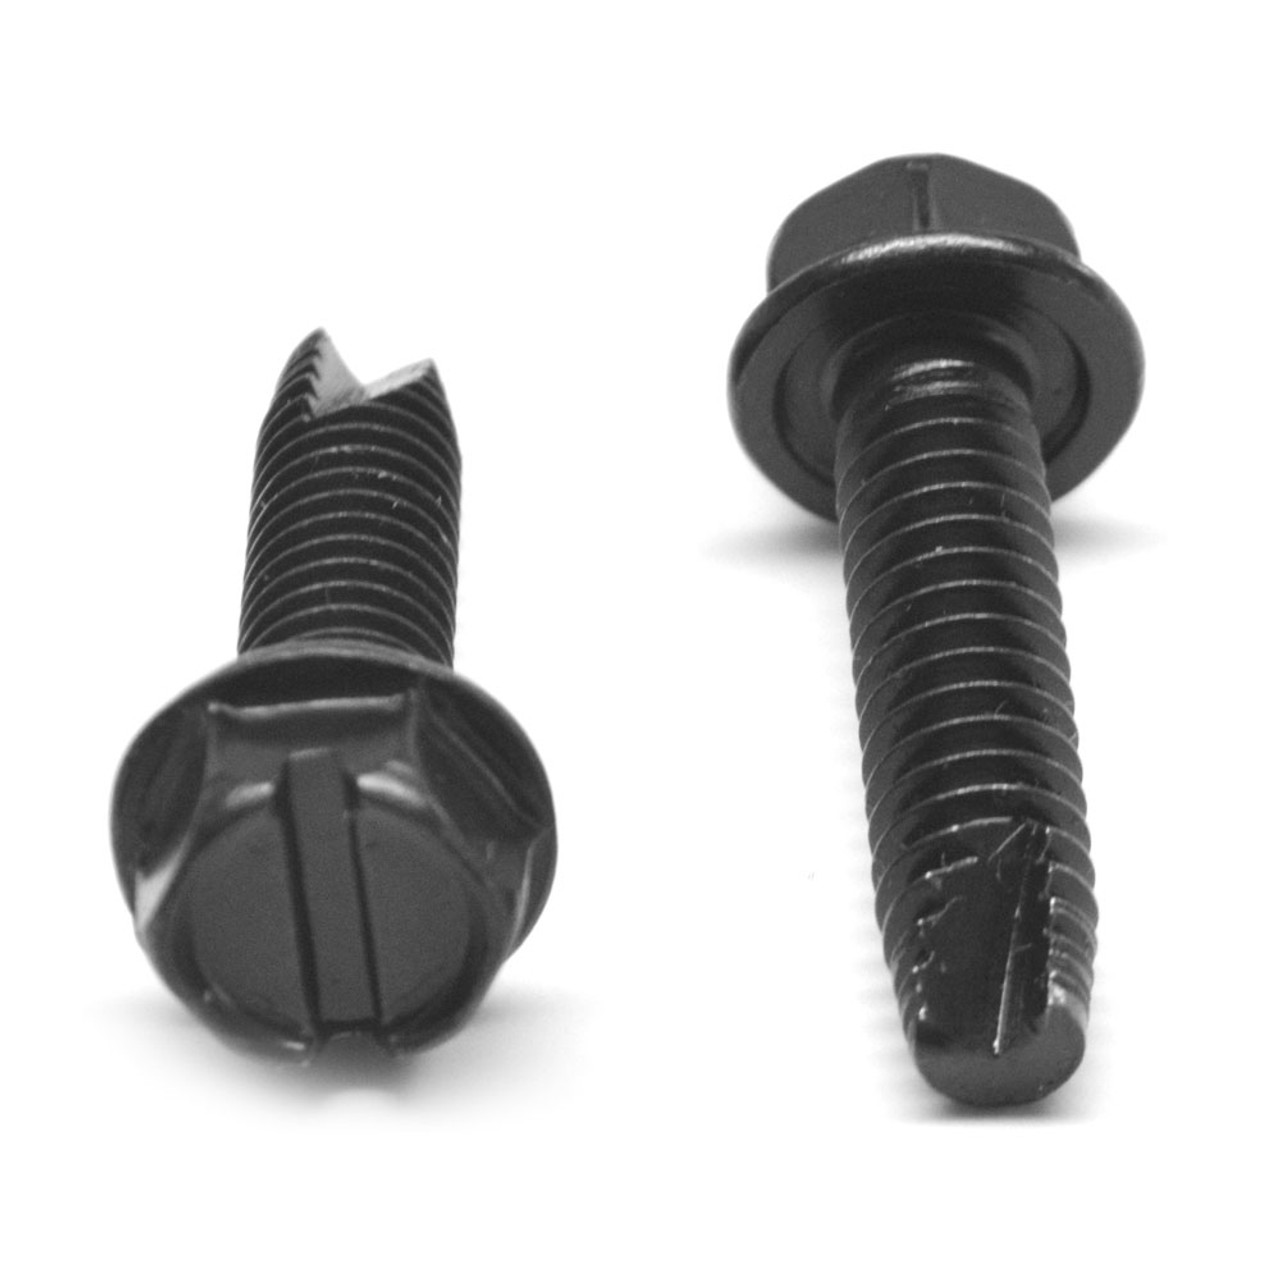 1/4-20 x 1 1/2 Coarse Thread Thread Cutting Screw Slotted Hex Washer Head Type 23 Low Carbon Steel Black Oxide